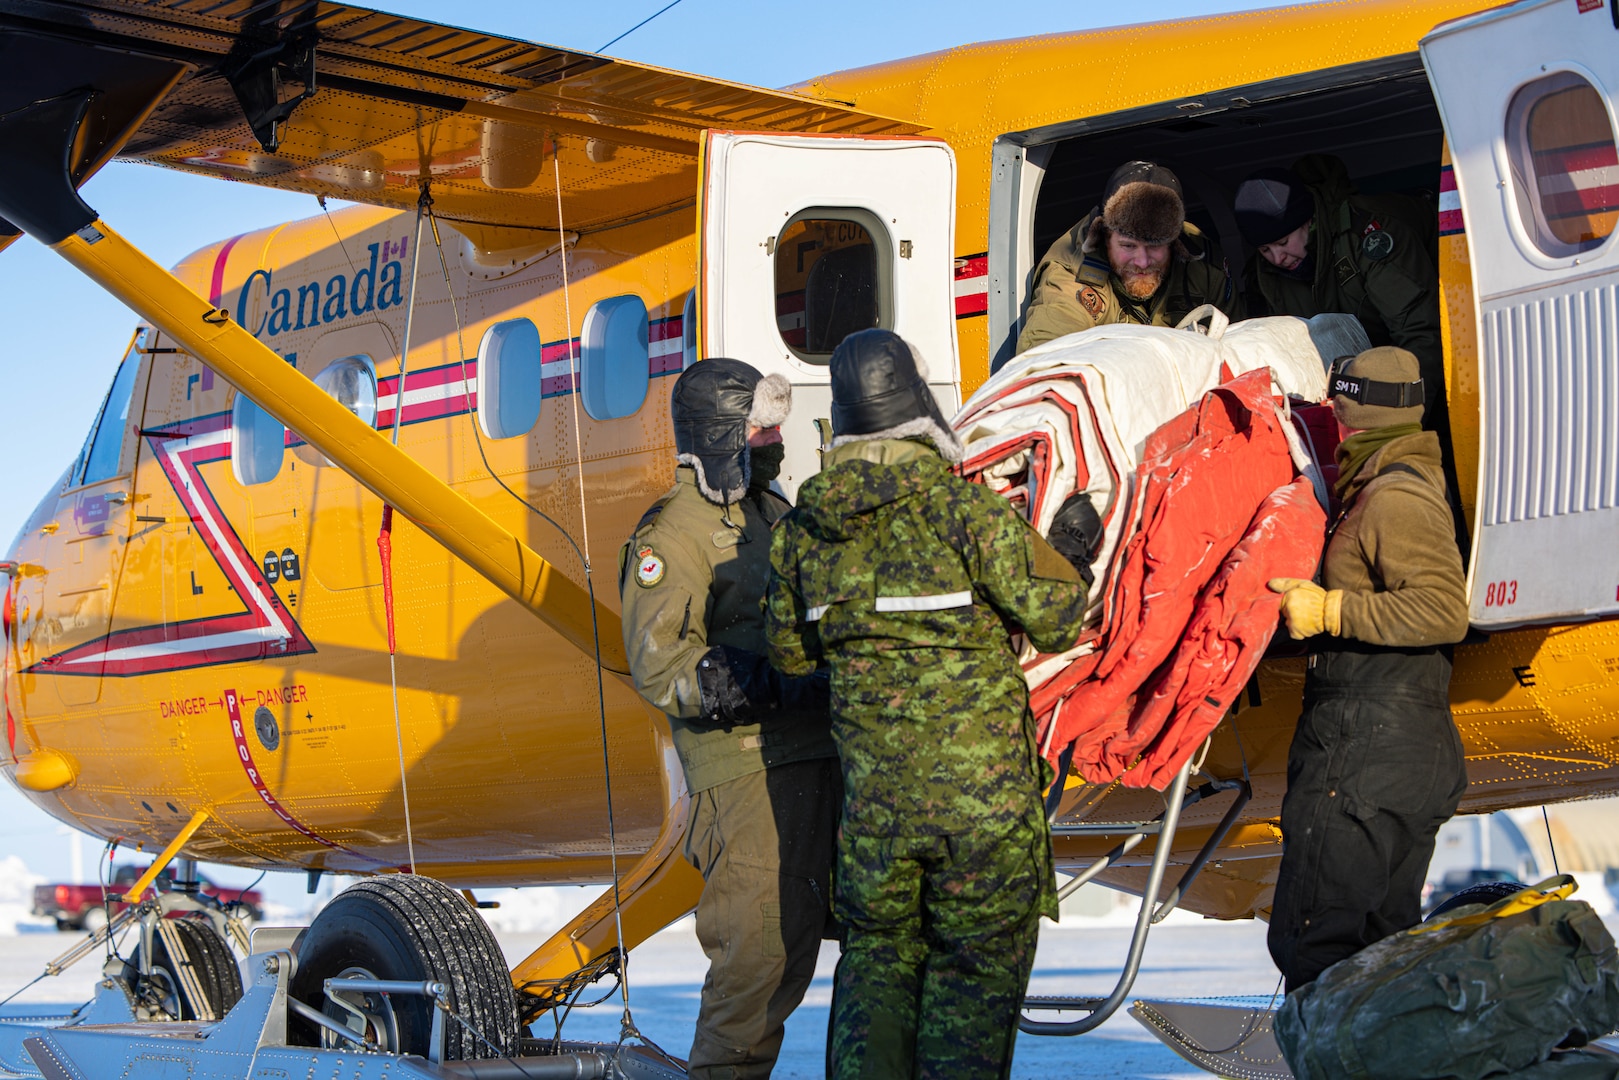 Airmen from the 109th Airlift Wing’s Polar Camp Skiway Team and members from the 440 Transport Squadron, Royal Canadian Armed Forces, load equipment and fuel into a Twin Otter aircraft at Resolute Bay, Nunavut, Canada, Feb. 27, 2023, to prepare for Exercise Guerrier Nordique. The Vermont National Guard is also participating in the exercise.